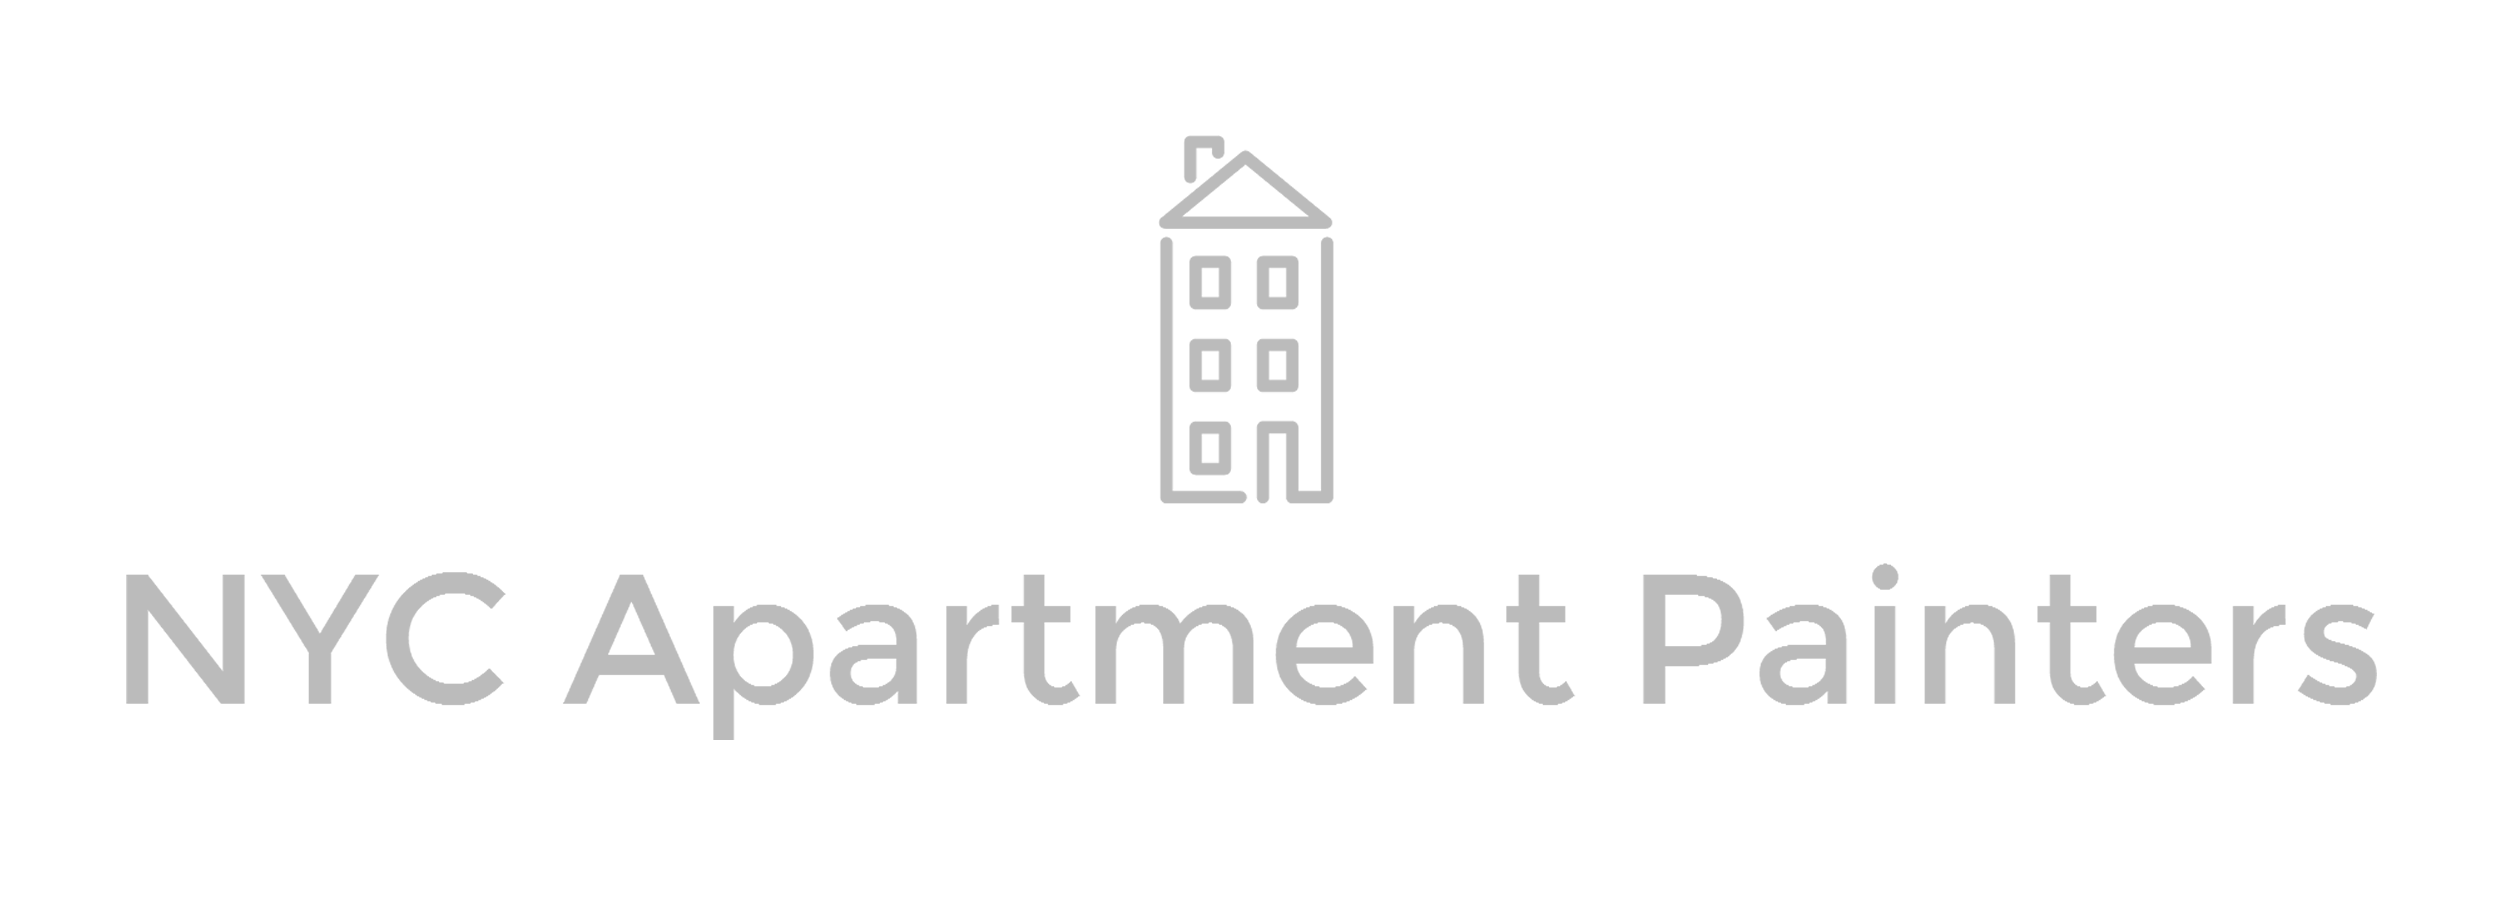 NYC Apartment Painters-logo.fw.png